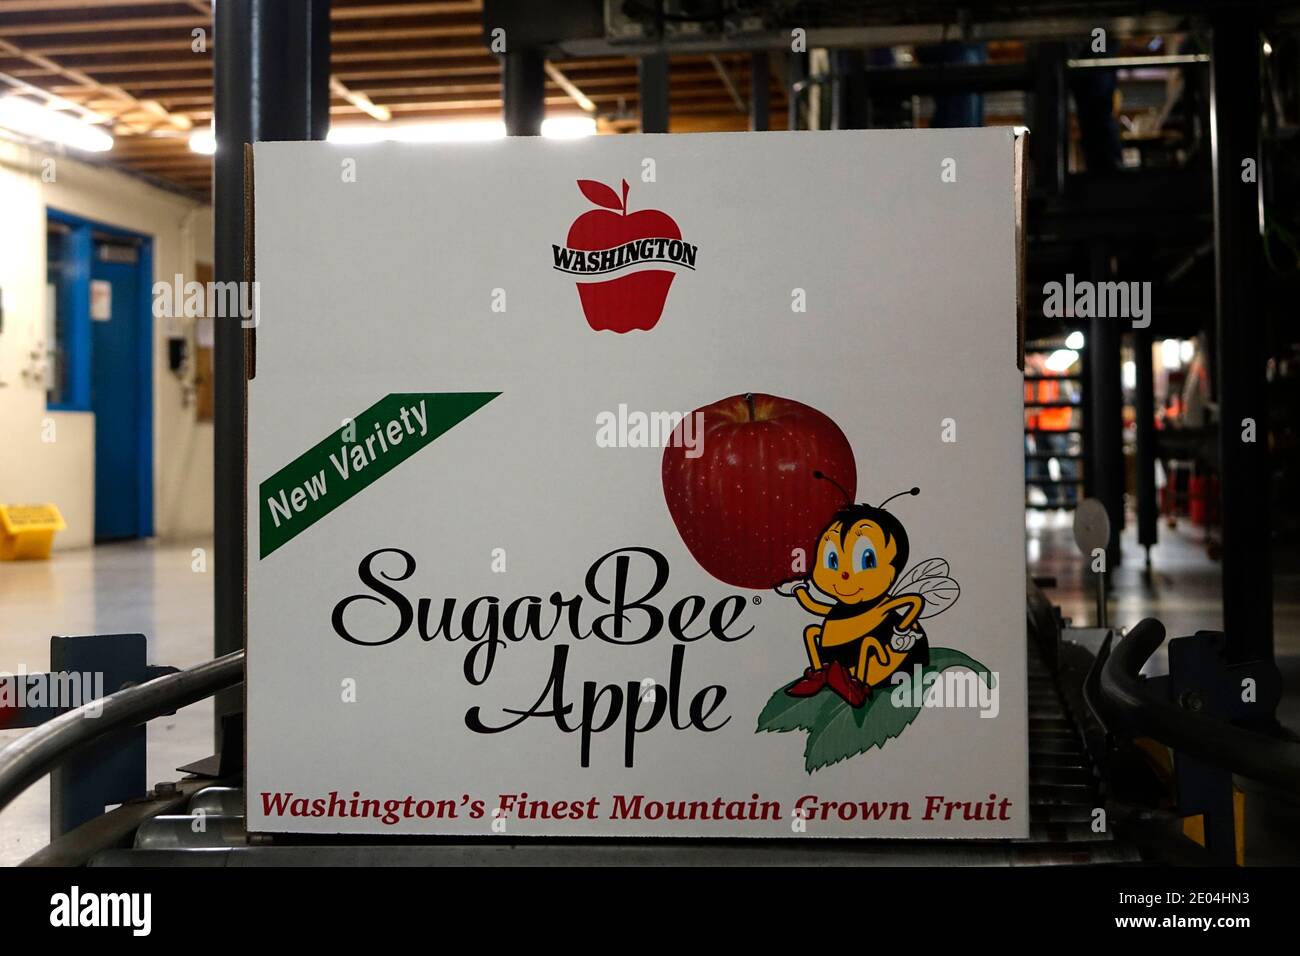 https://c8.alamy.com/comp/2E04HN3/sugarbee-apples-are-grown-in-the-elevated-orchards-of-washington-state-it-is-a-cross-pollinated-apple-between-a-honeycrisp-and-another-unknown-variet-2E04HN3.jpg